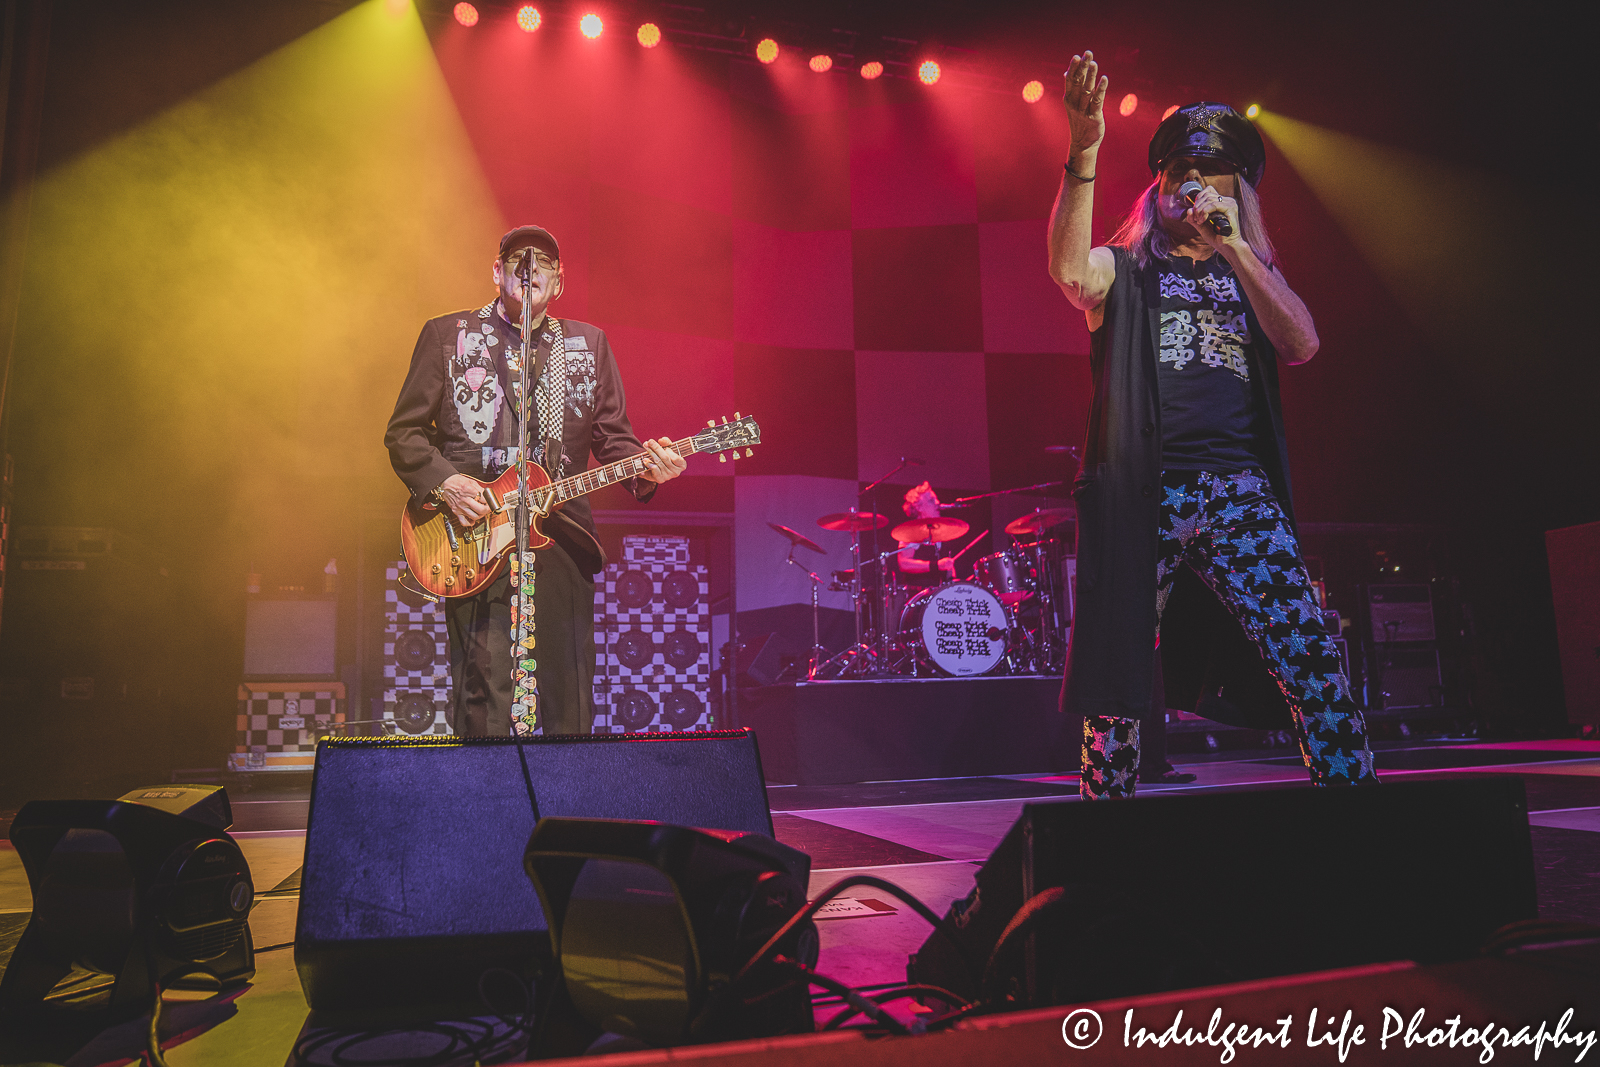 Cheap Trick frontman Robin Zander performing with guitarist Rick Nielsen and drummer Daxx Nielsen at Uptown Theater in Kansas City, MO on September 13, 2022.